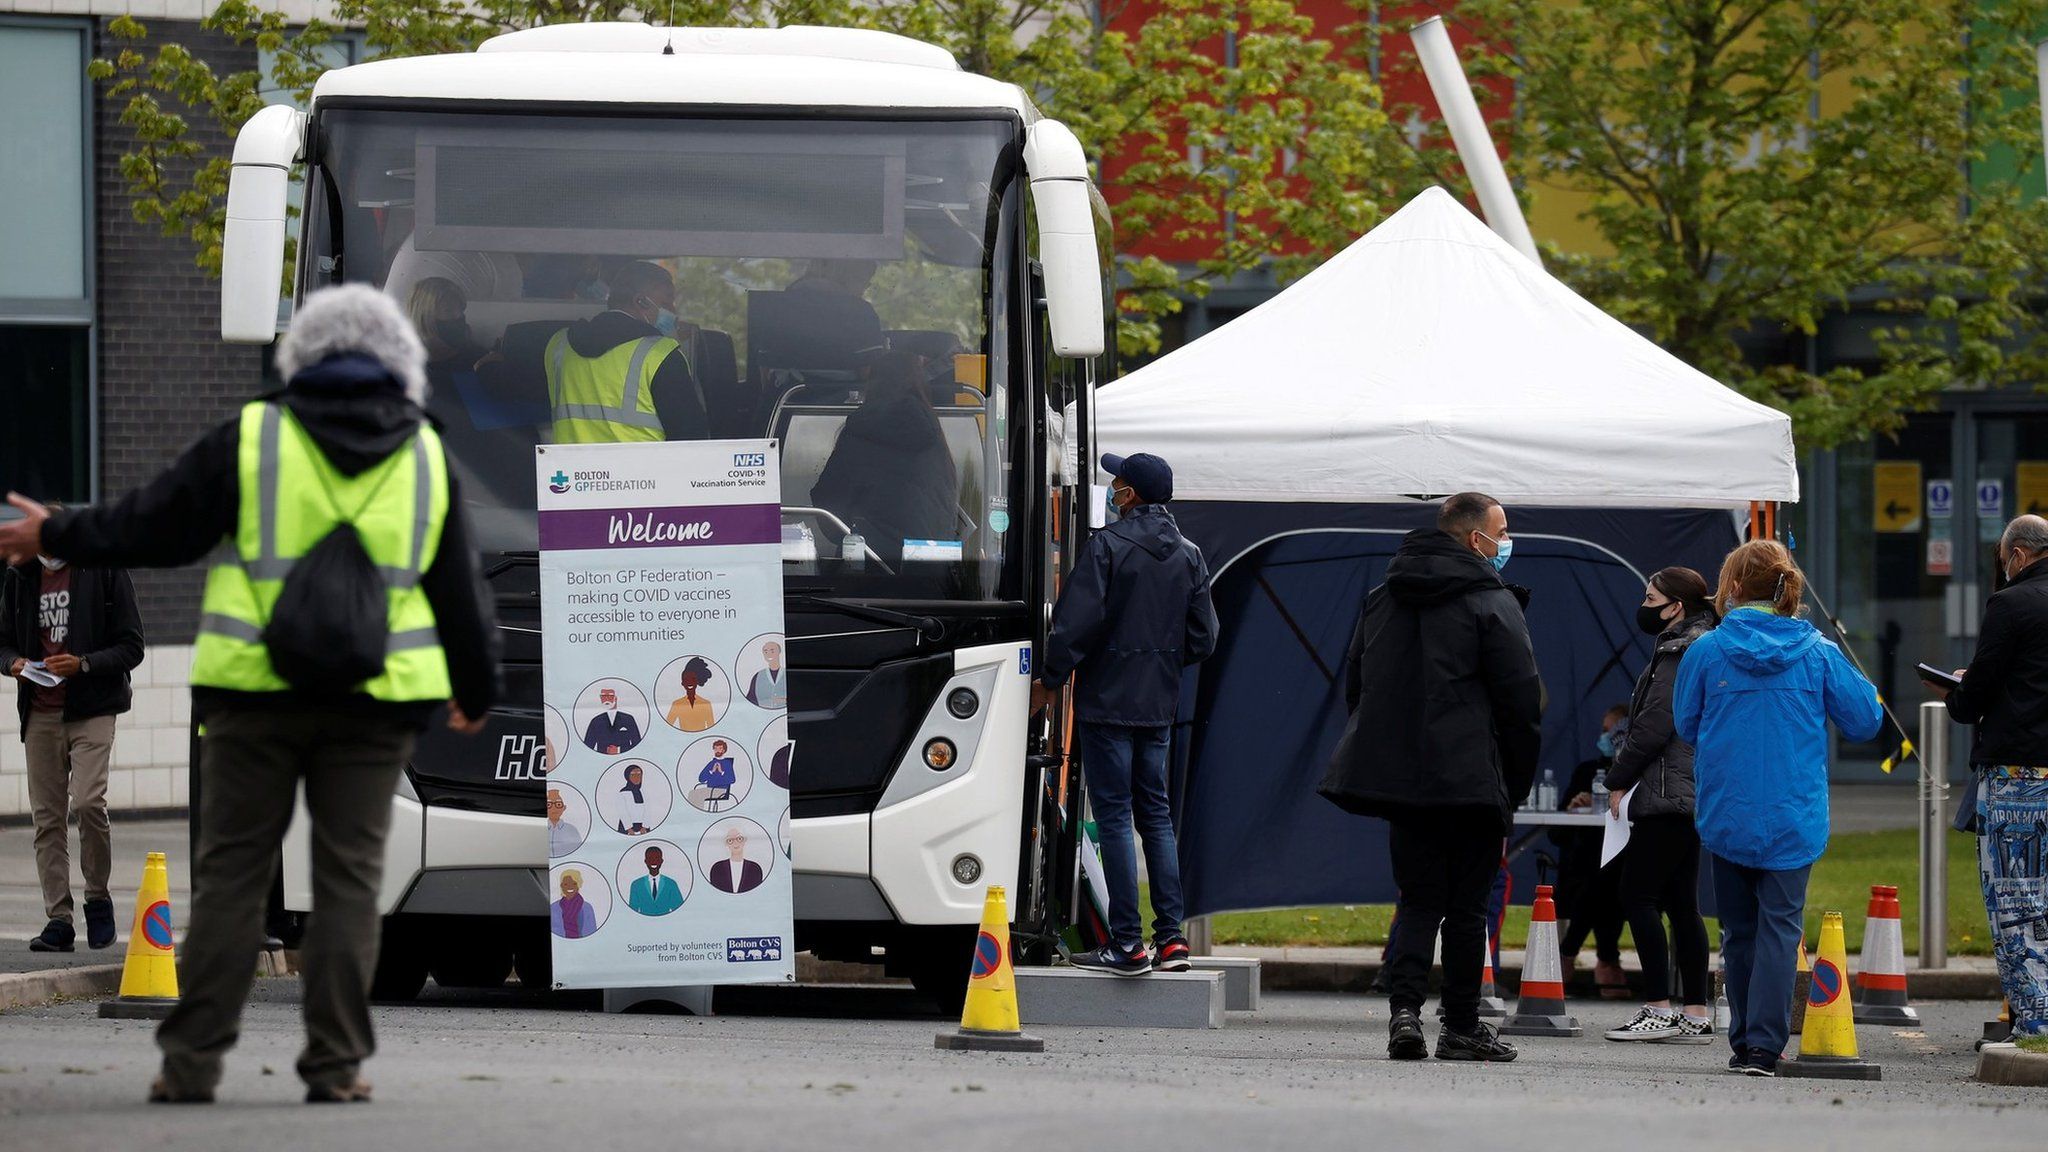 People line up outside a mobile vaccination centre in Bolton on Friday